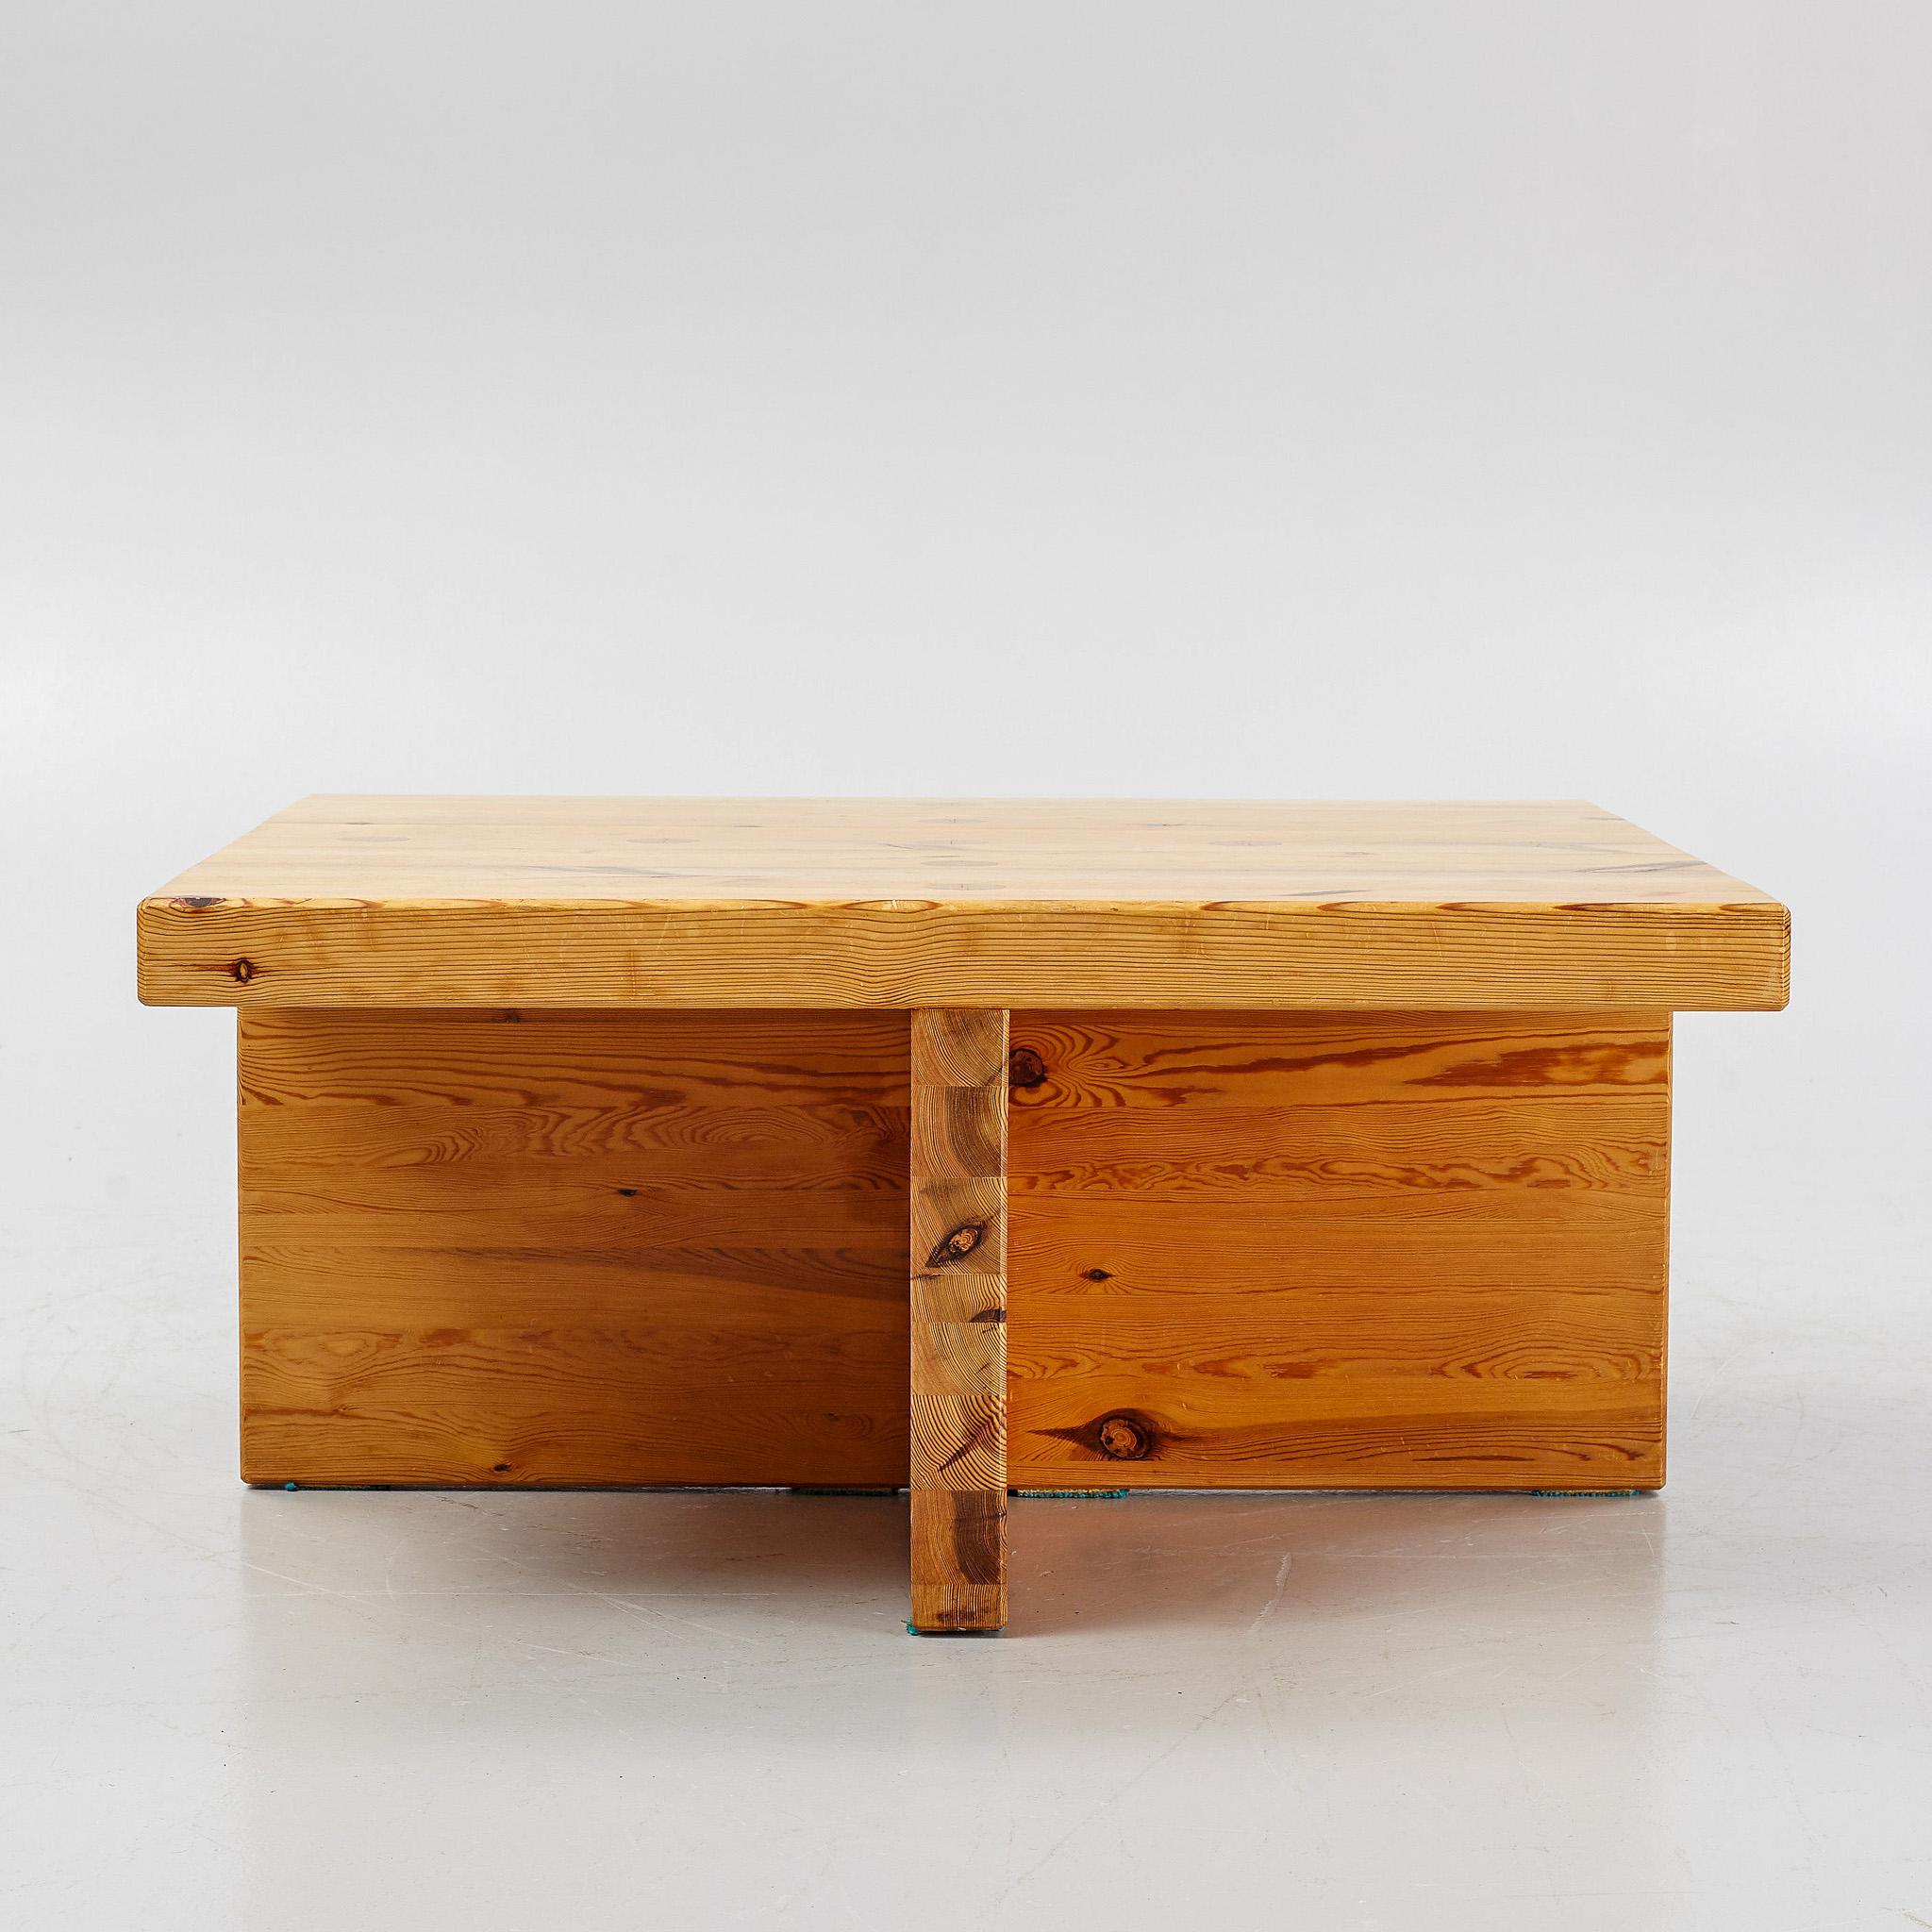 Squared Coffee Sofa Table in Solid Pine by Sven Larsson Produced in Sweden 1970s For Sale 1